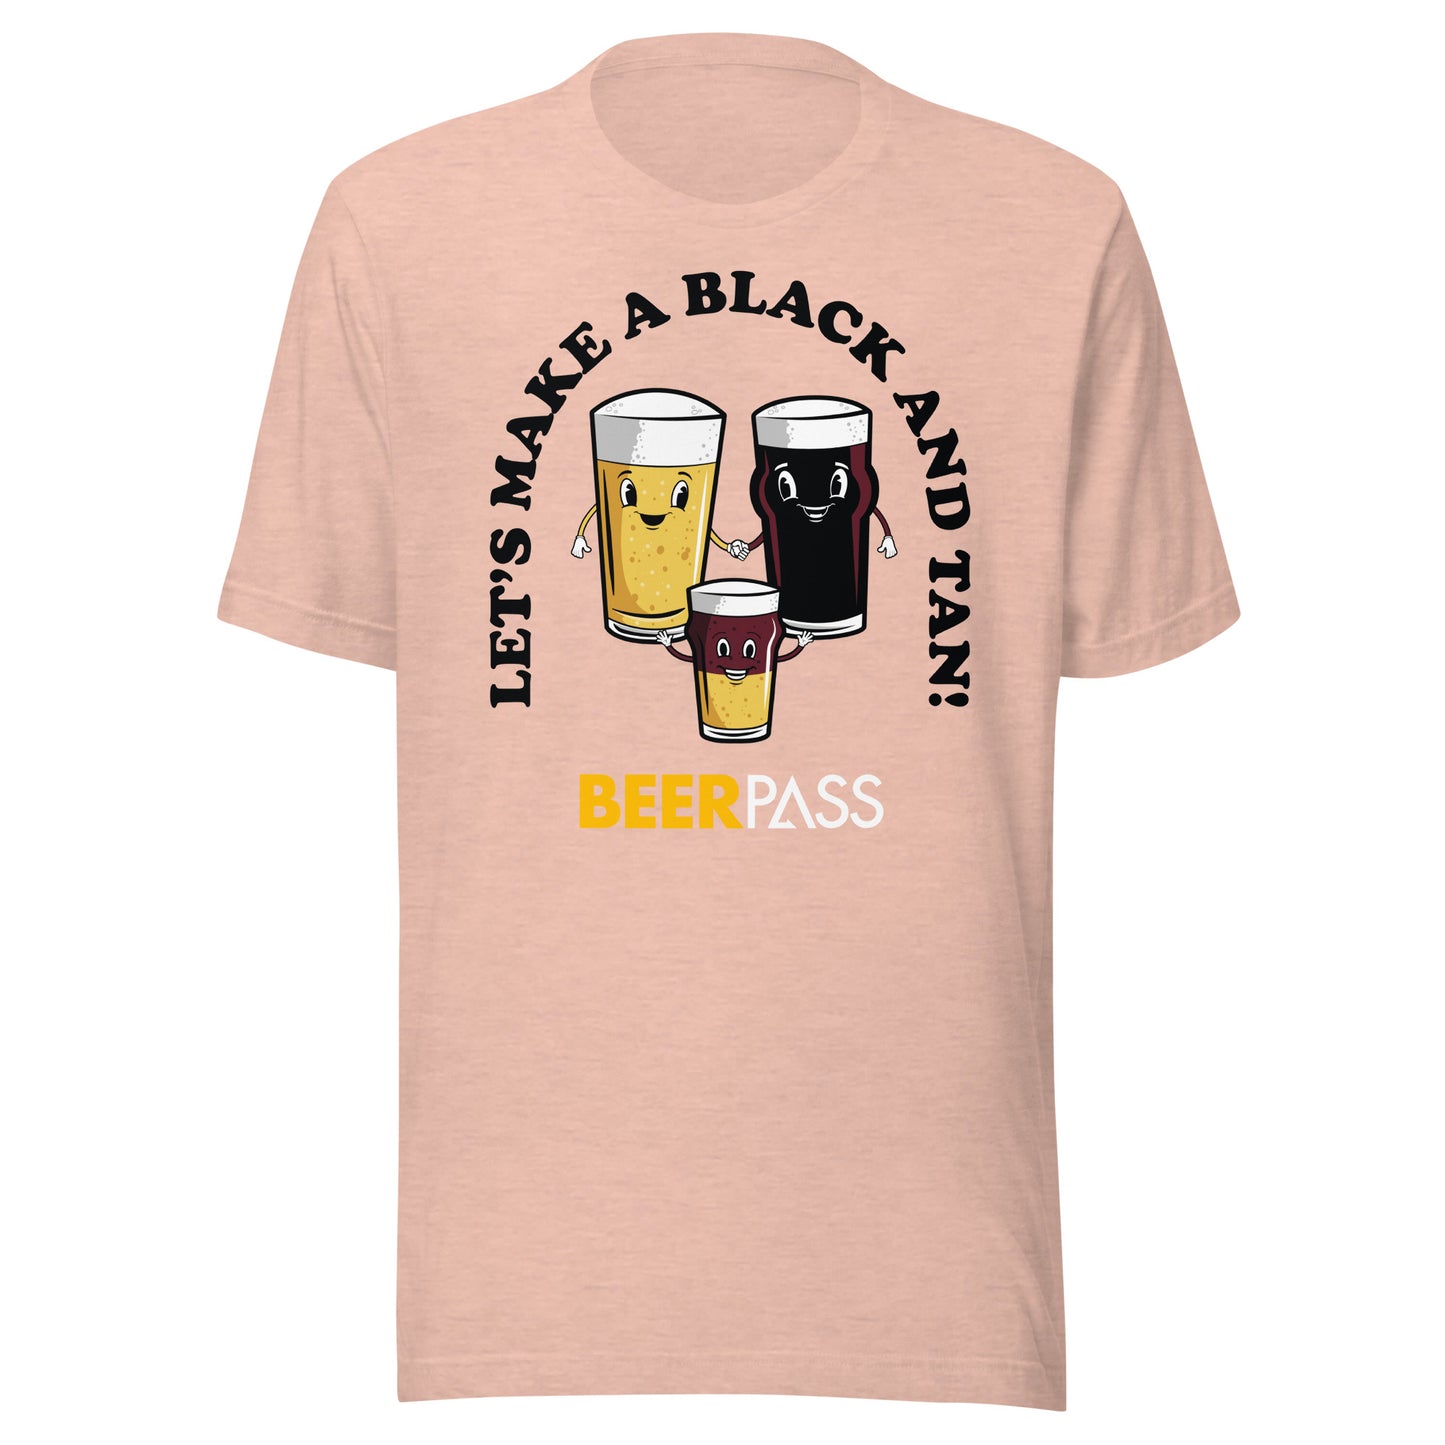 Let's Make a Black and Tan!